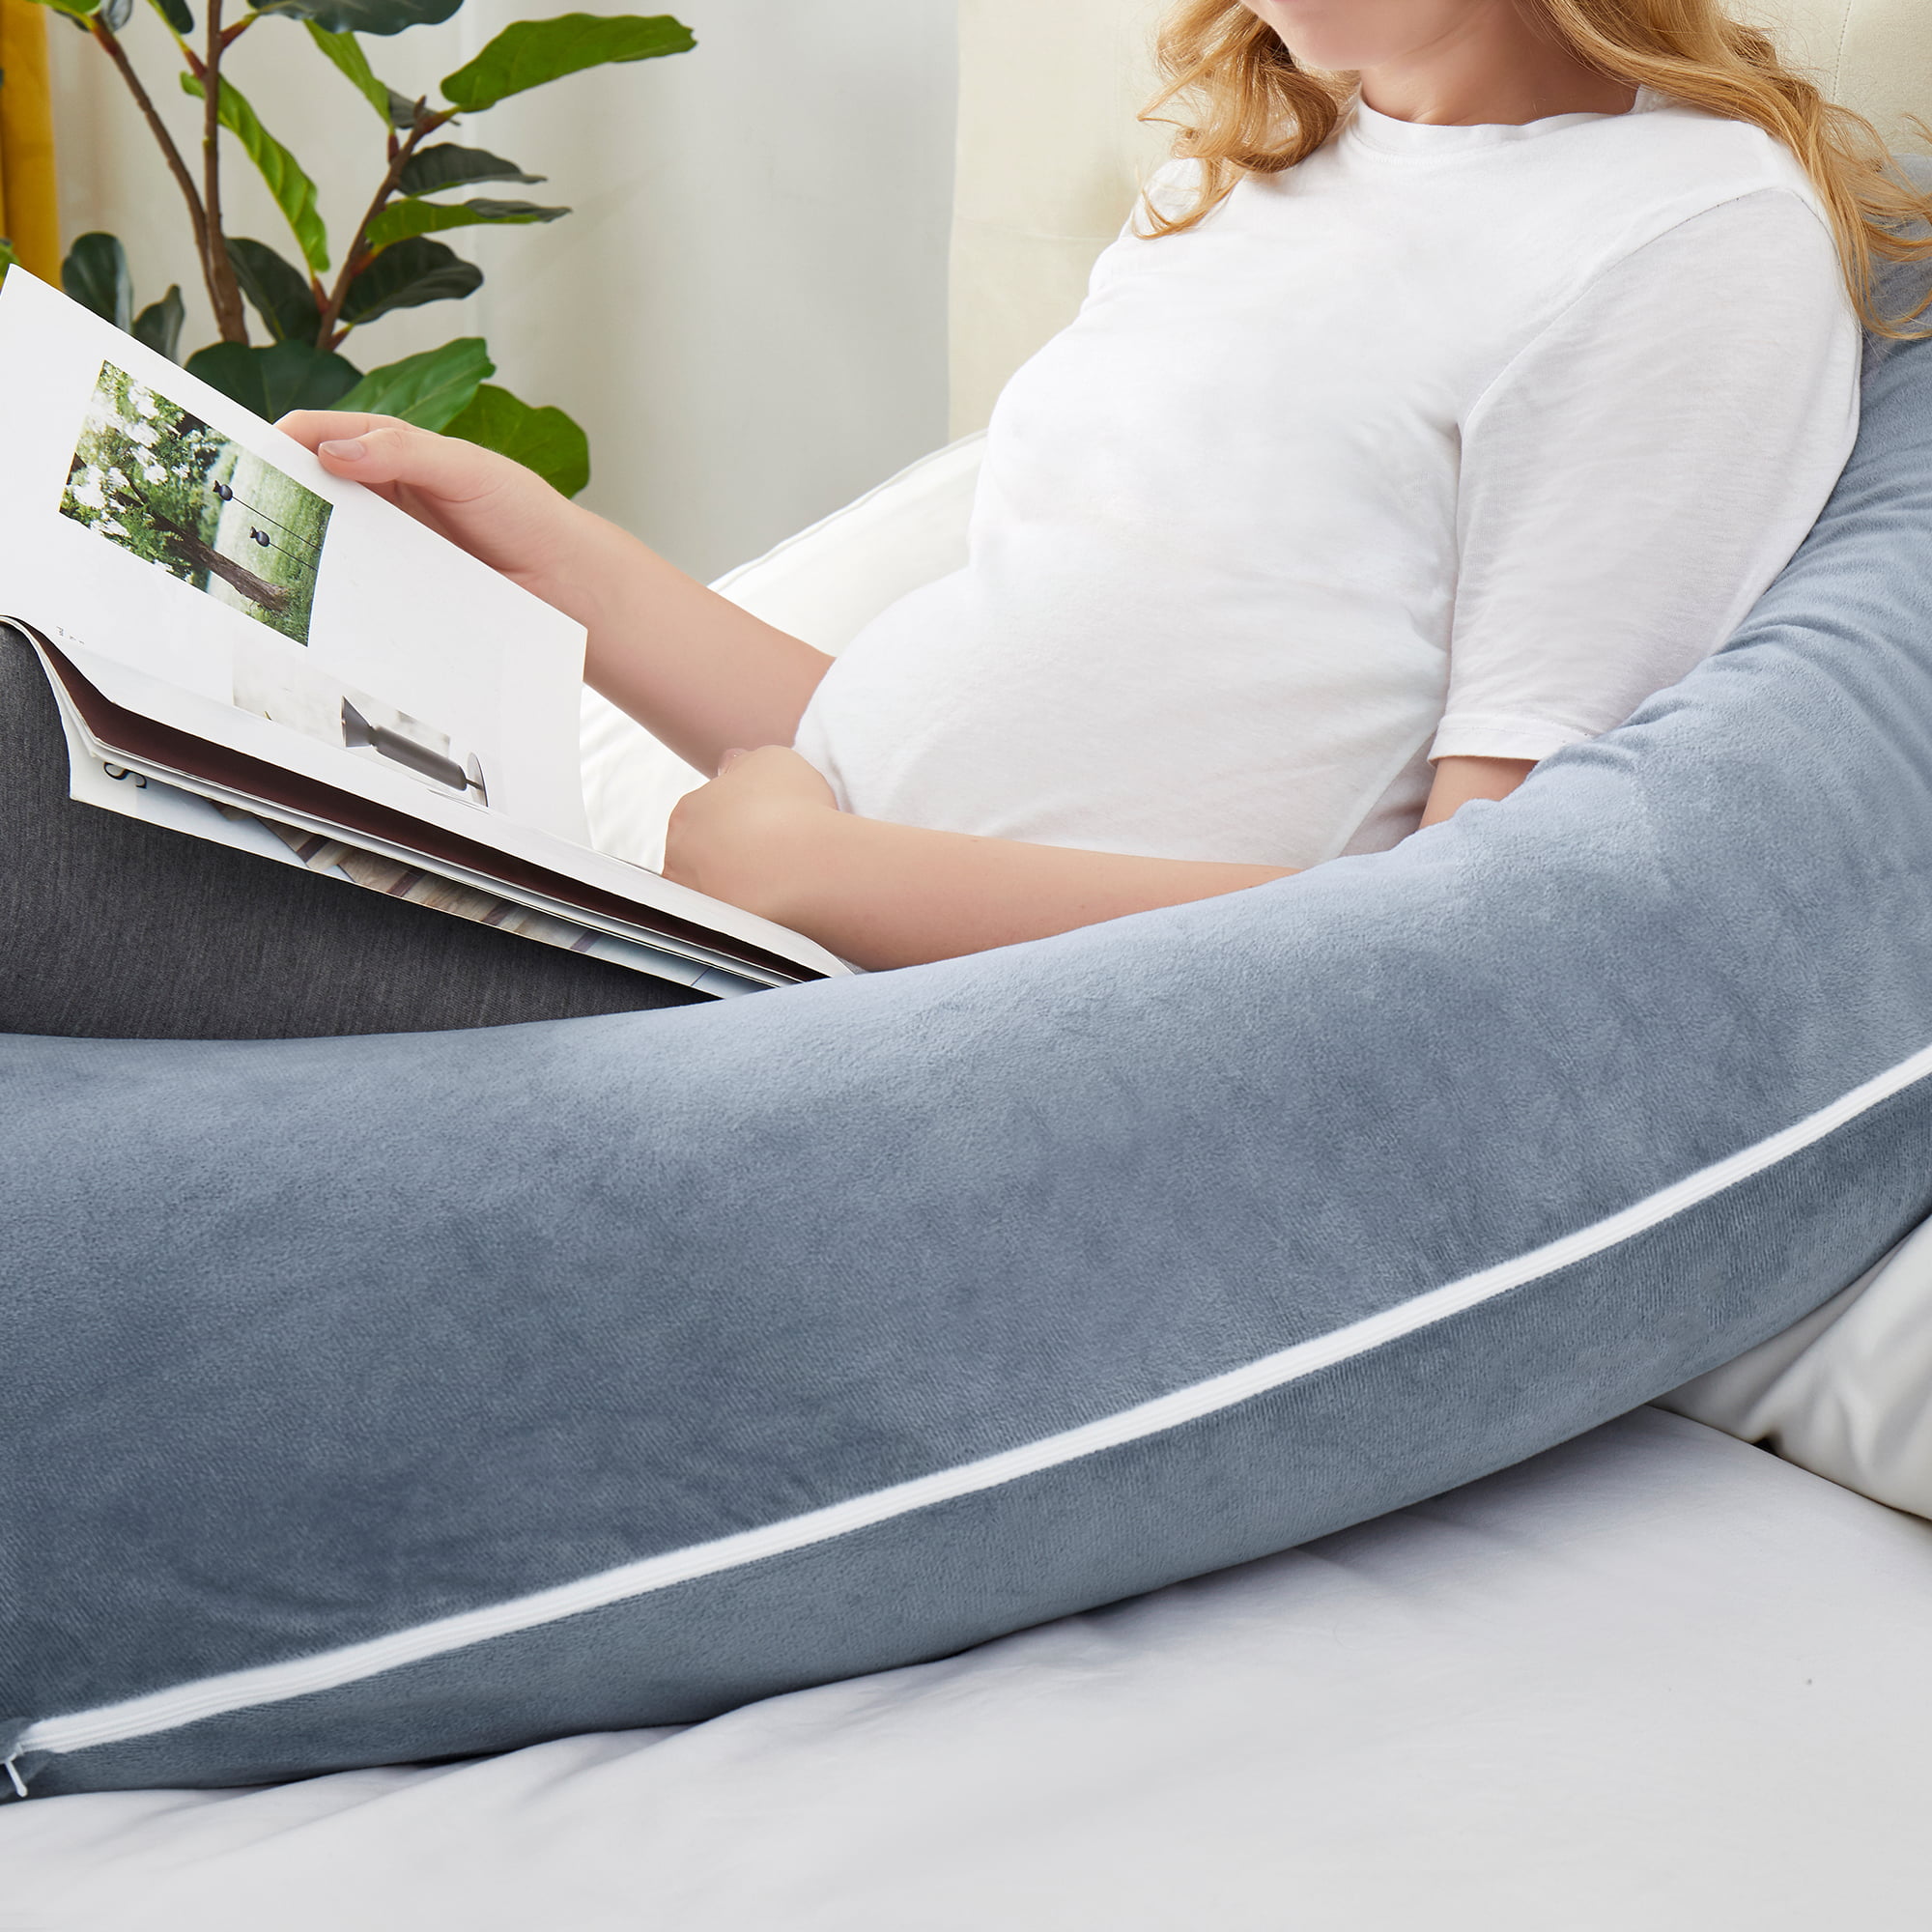 Cotton Adjustable Pregnancy Pillow For Full Body Pregnancy Waist And U Body  Cushion Pad For Comfortable Sleep 230504 From Nian08, $14.56